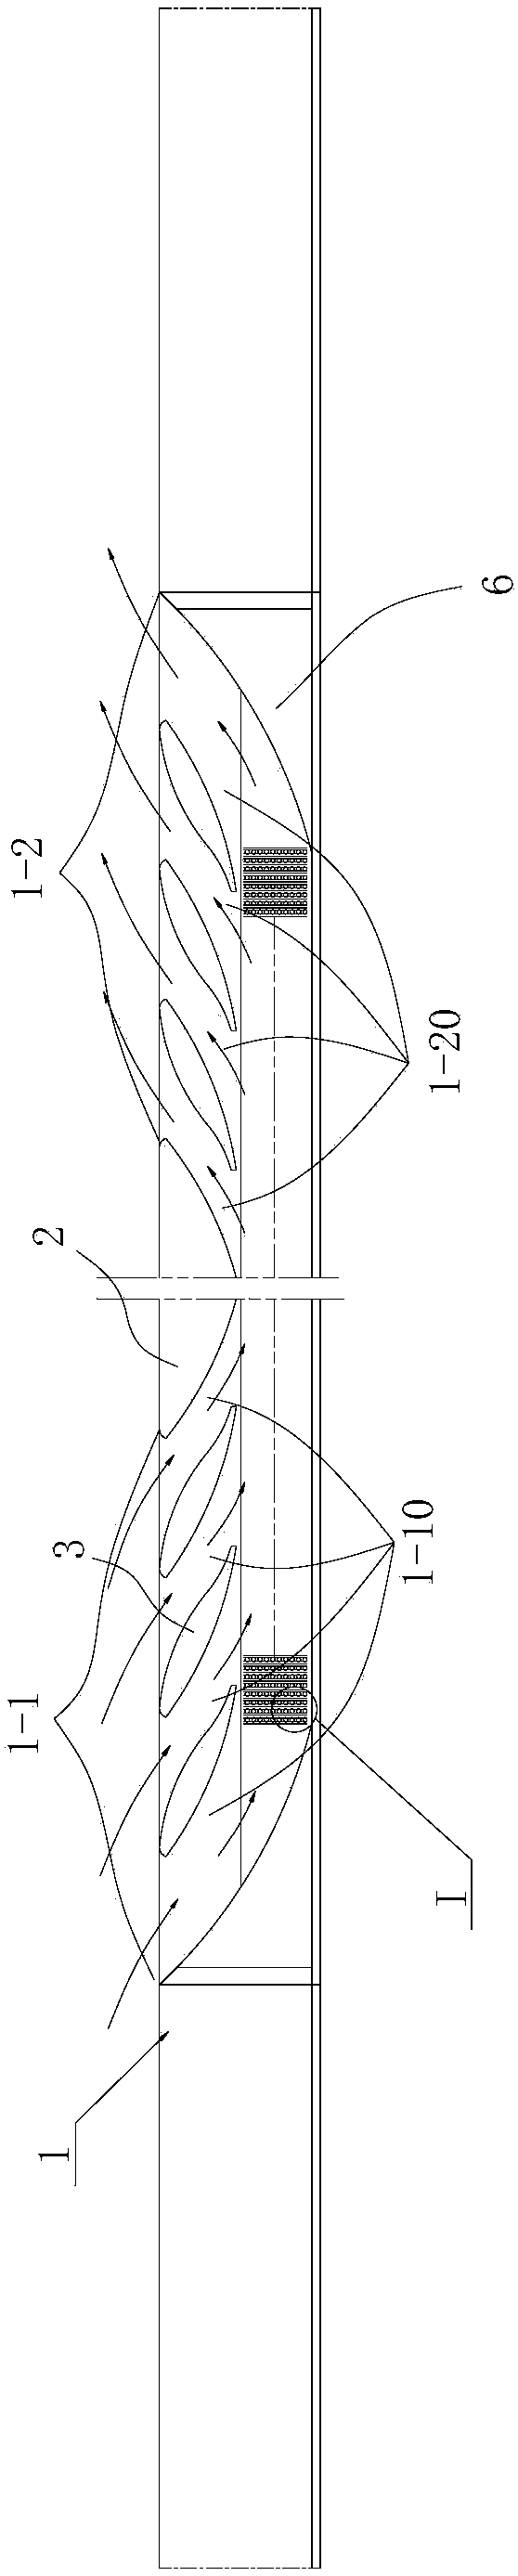 Automatic air blowing and filtering system applied to air inlets of transportation tools